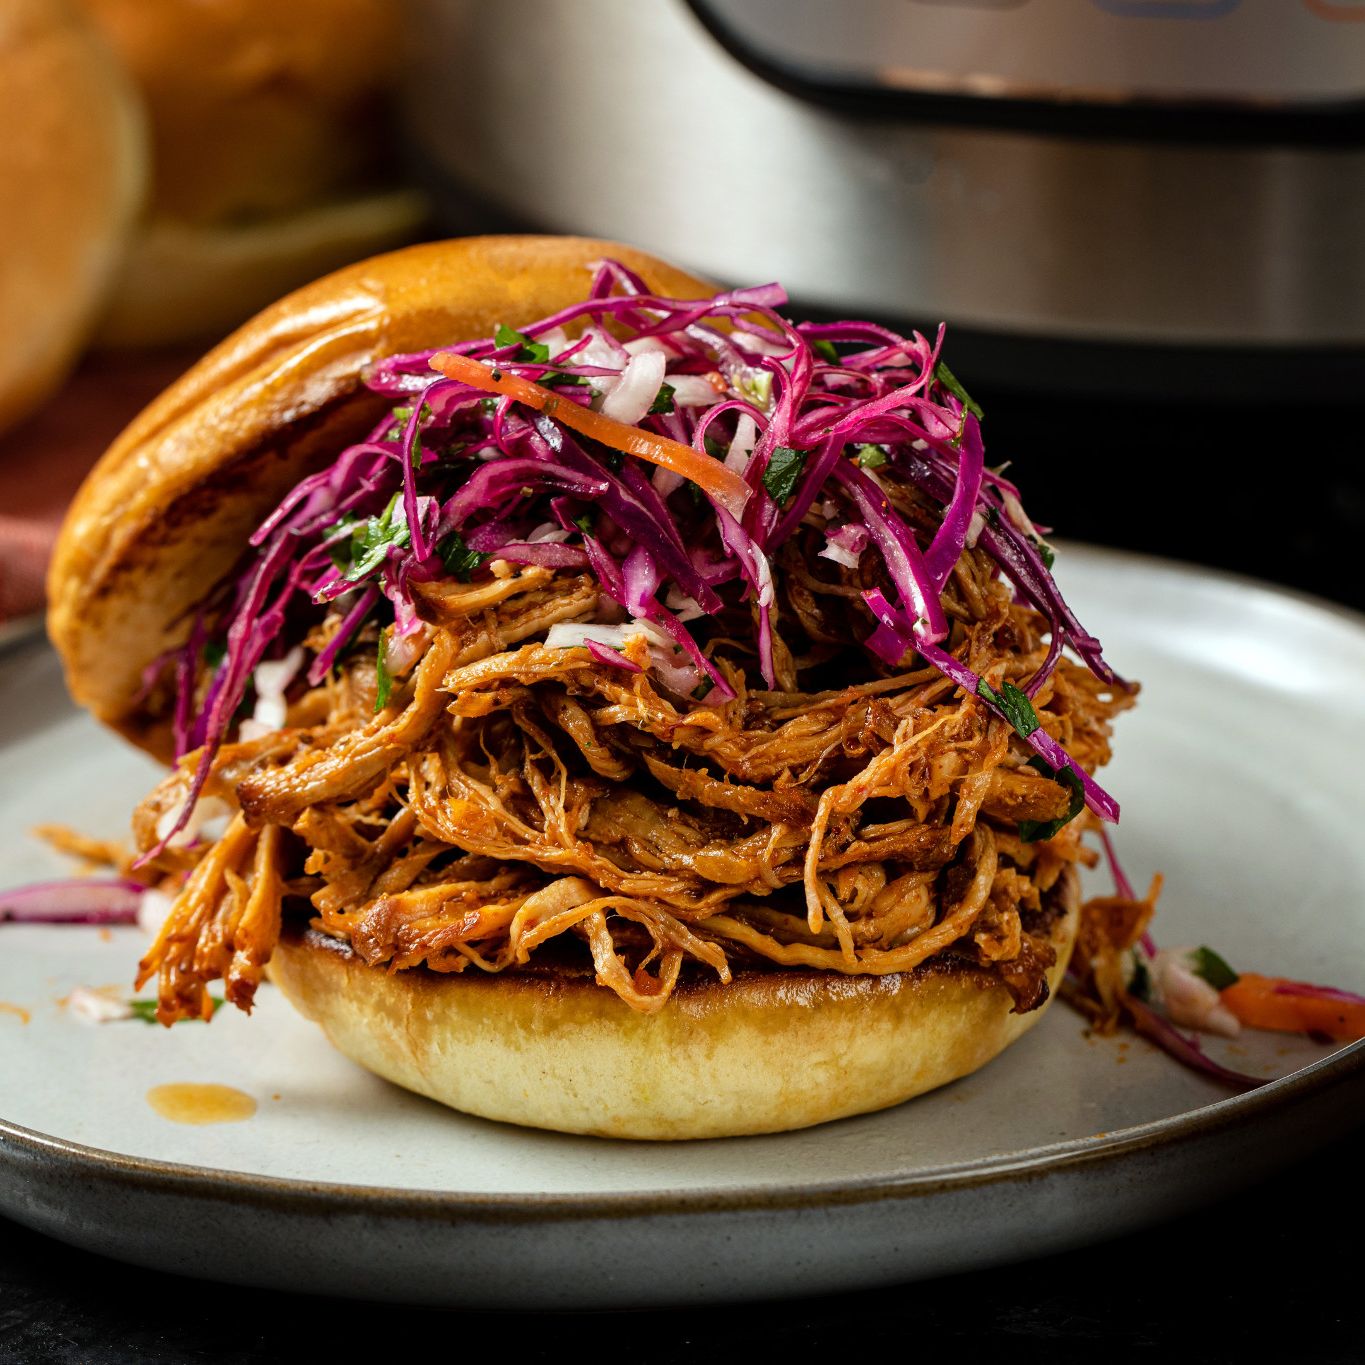 Pulled Pork Side Dishes Ideas : Pulled Pork Side Dishes Ideas - What S For Dinner Pulled ... - What is the perfect cooking time for pulled pork?